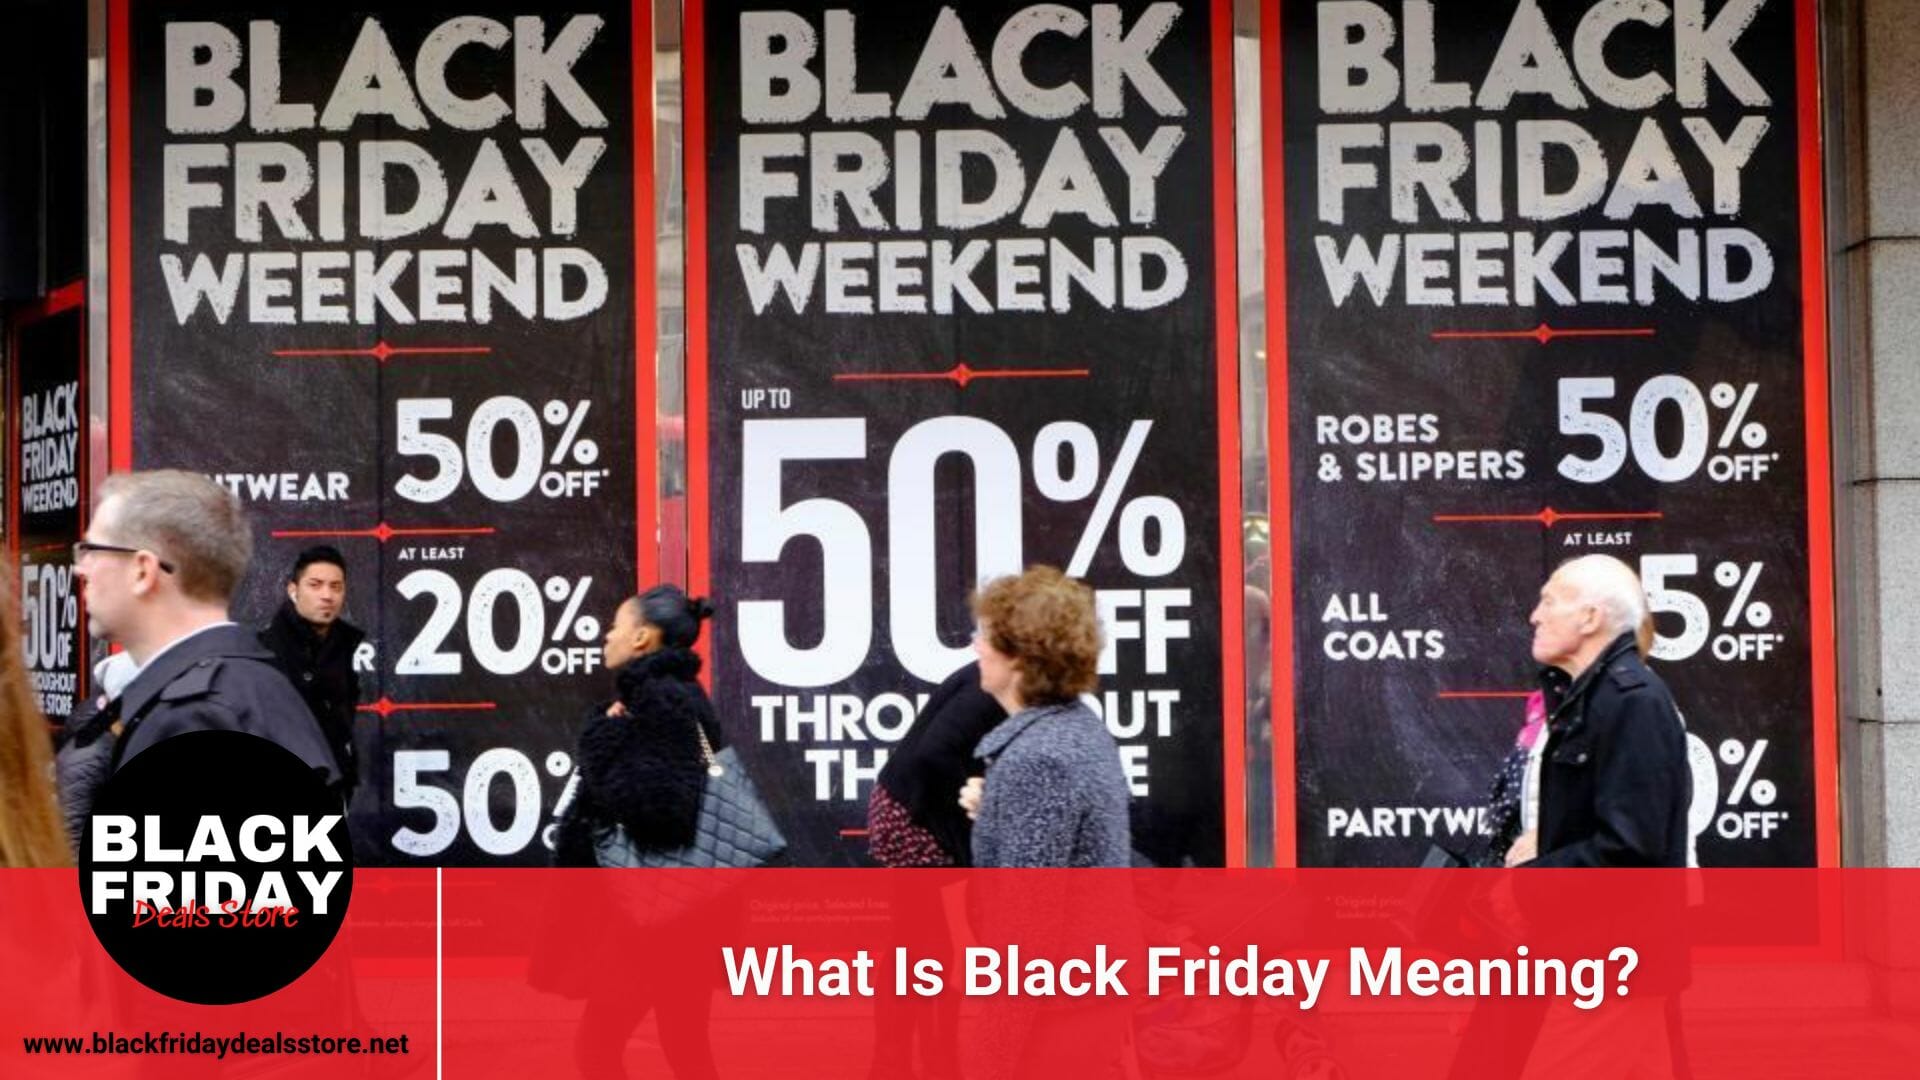 What Is Black Friday Meaning